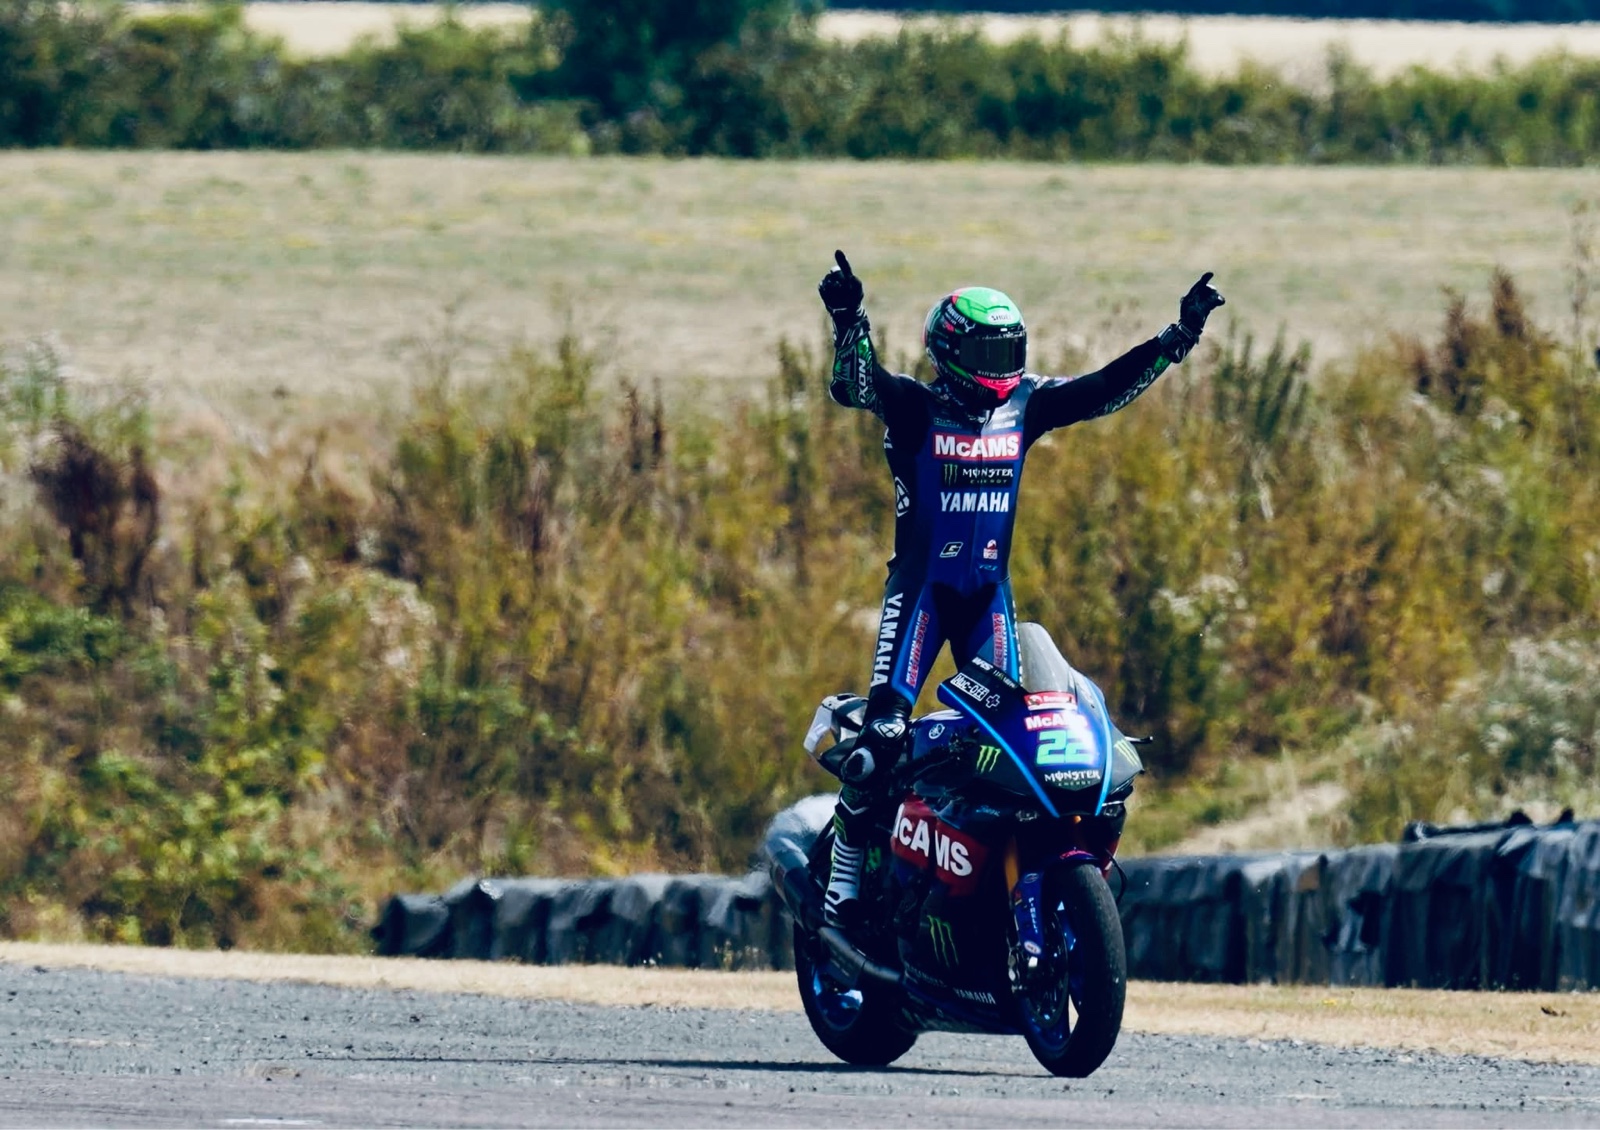 Yamaha Rider standing on a bike with arms inthe air.